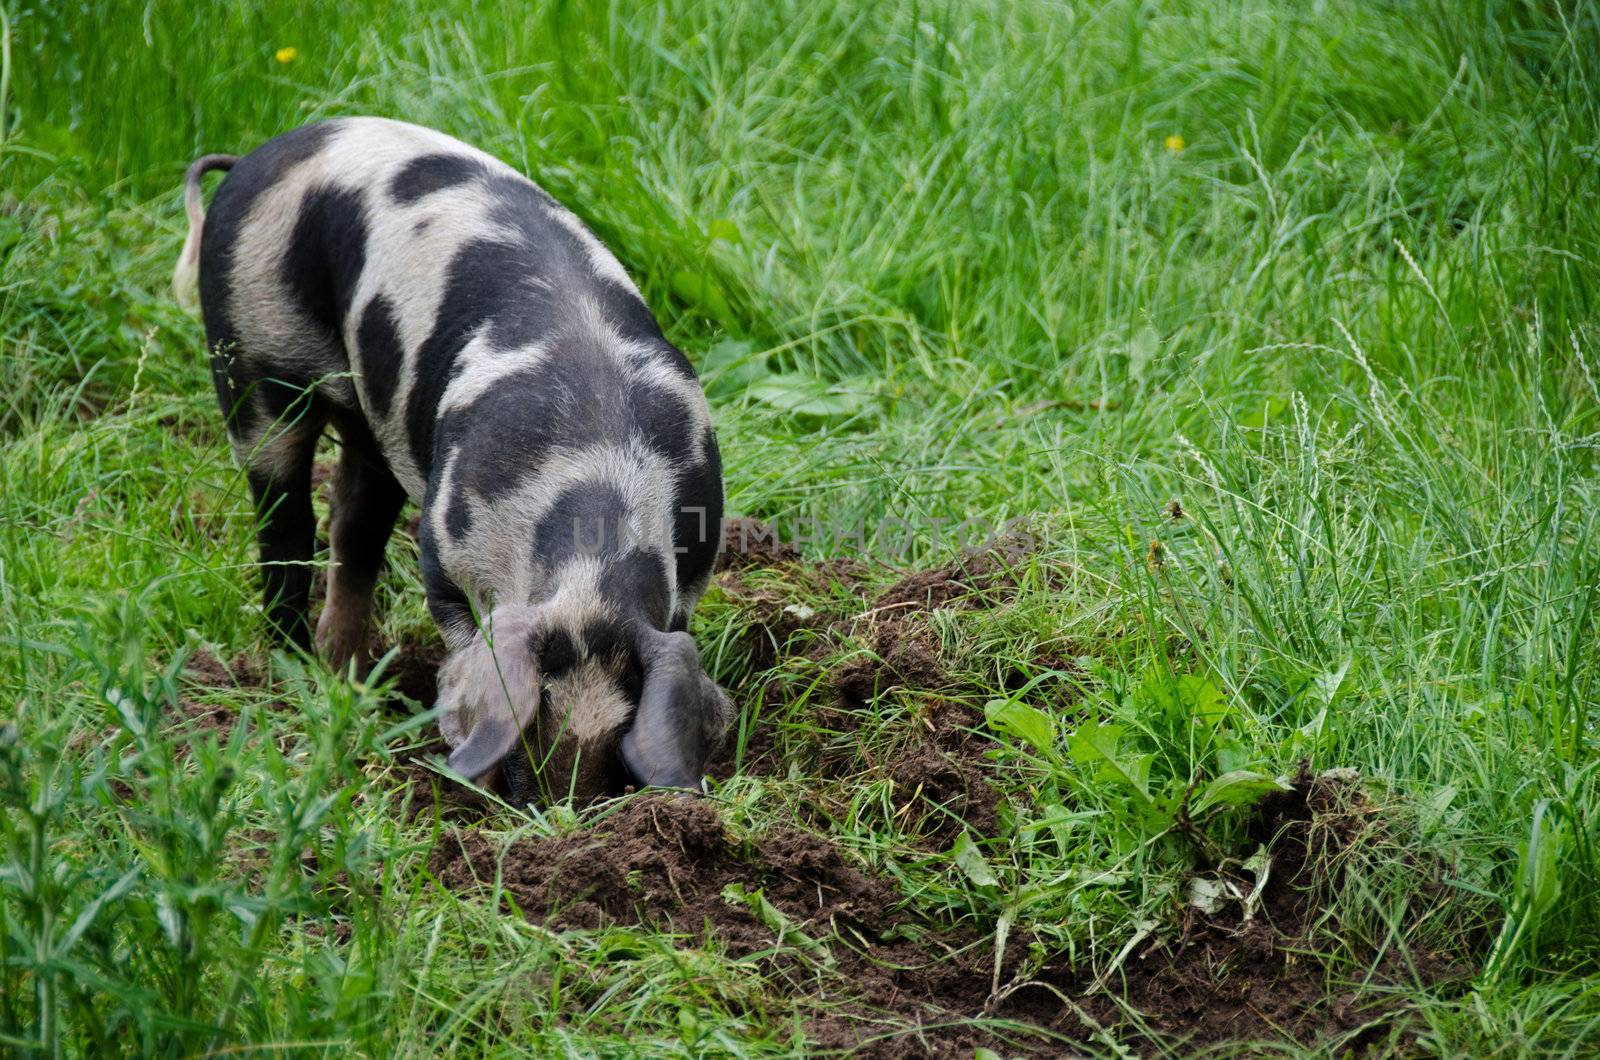 pig raised on an organic farm searching for food in the grass